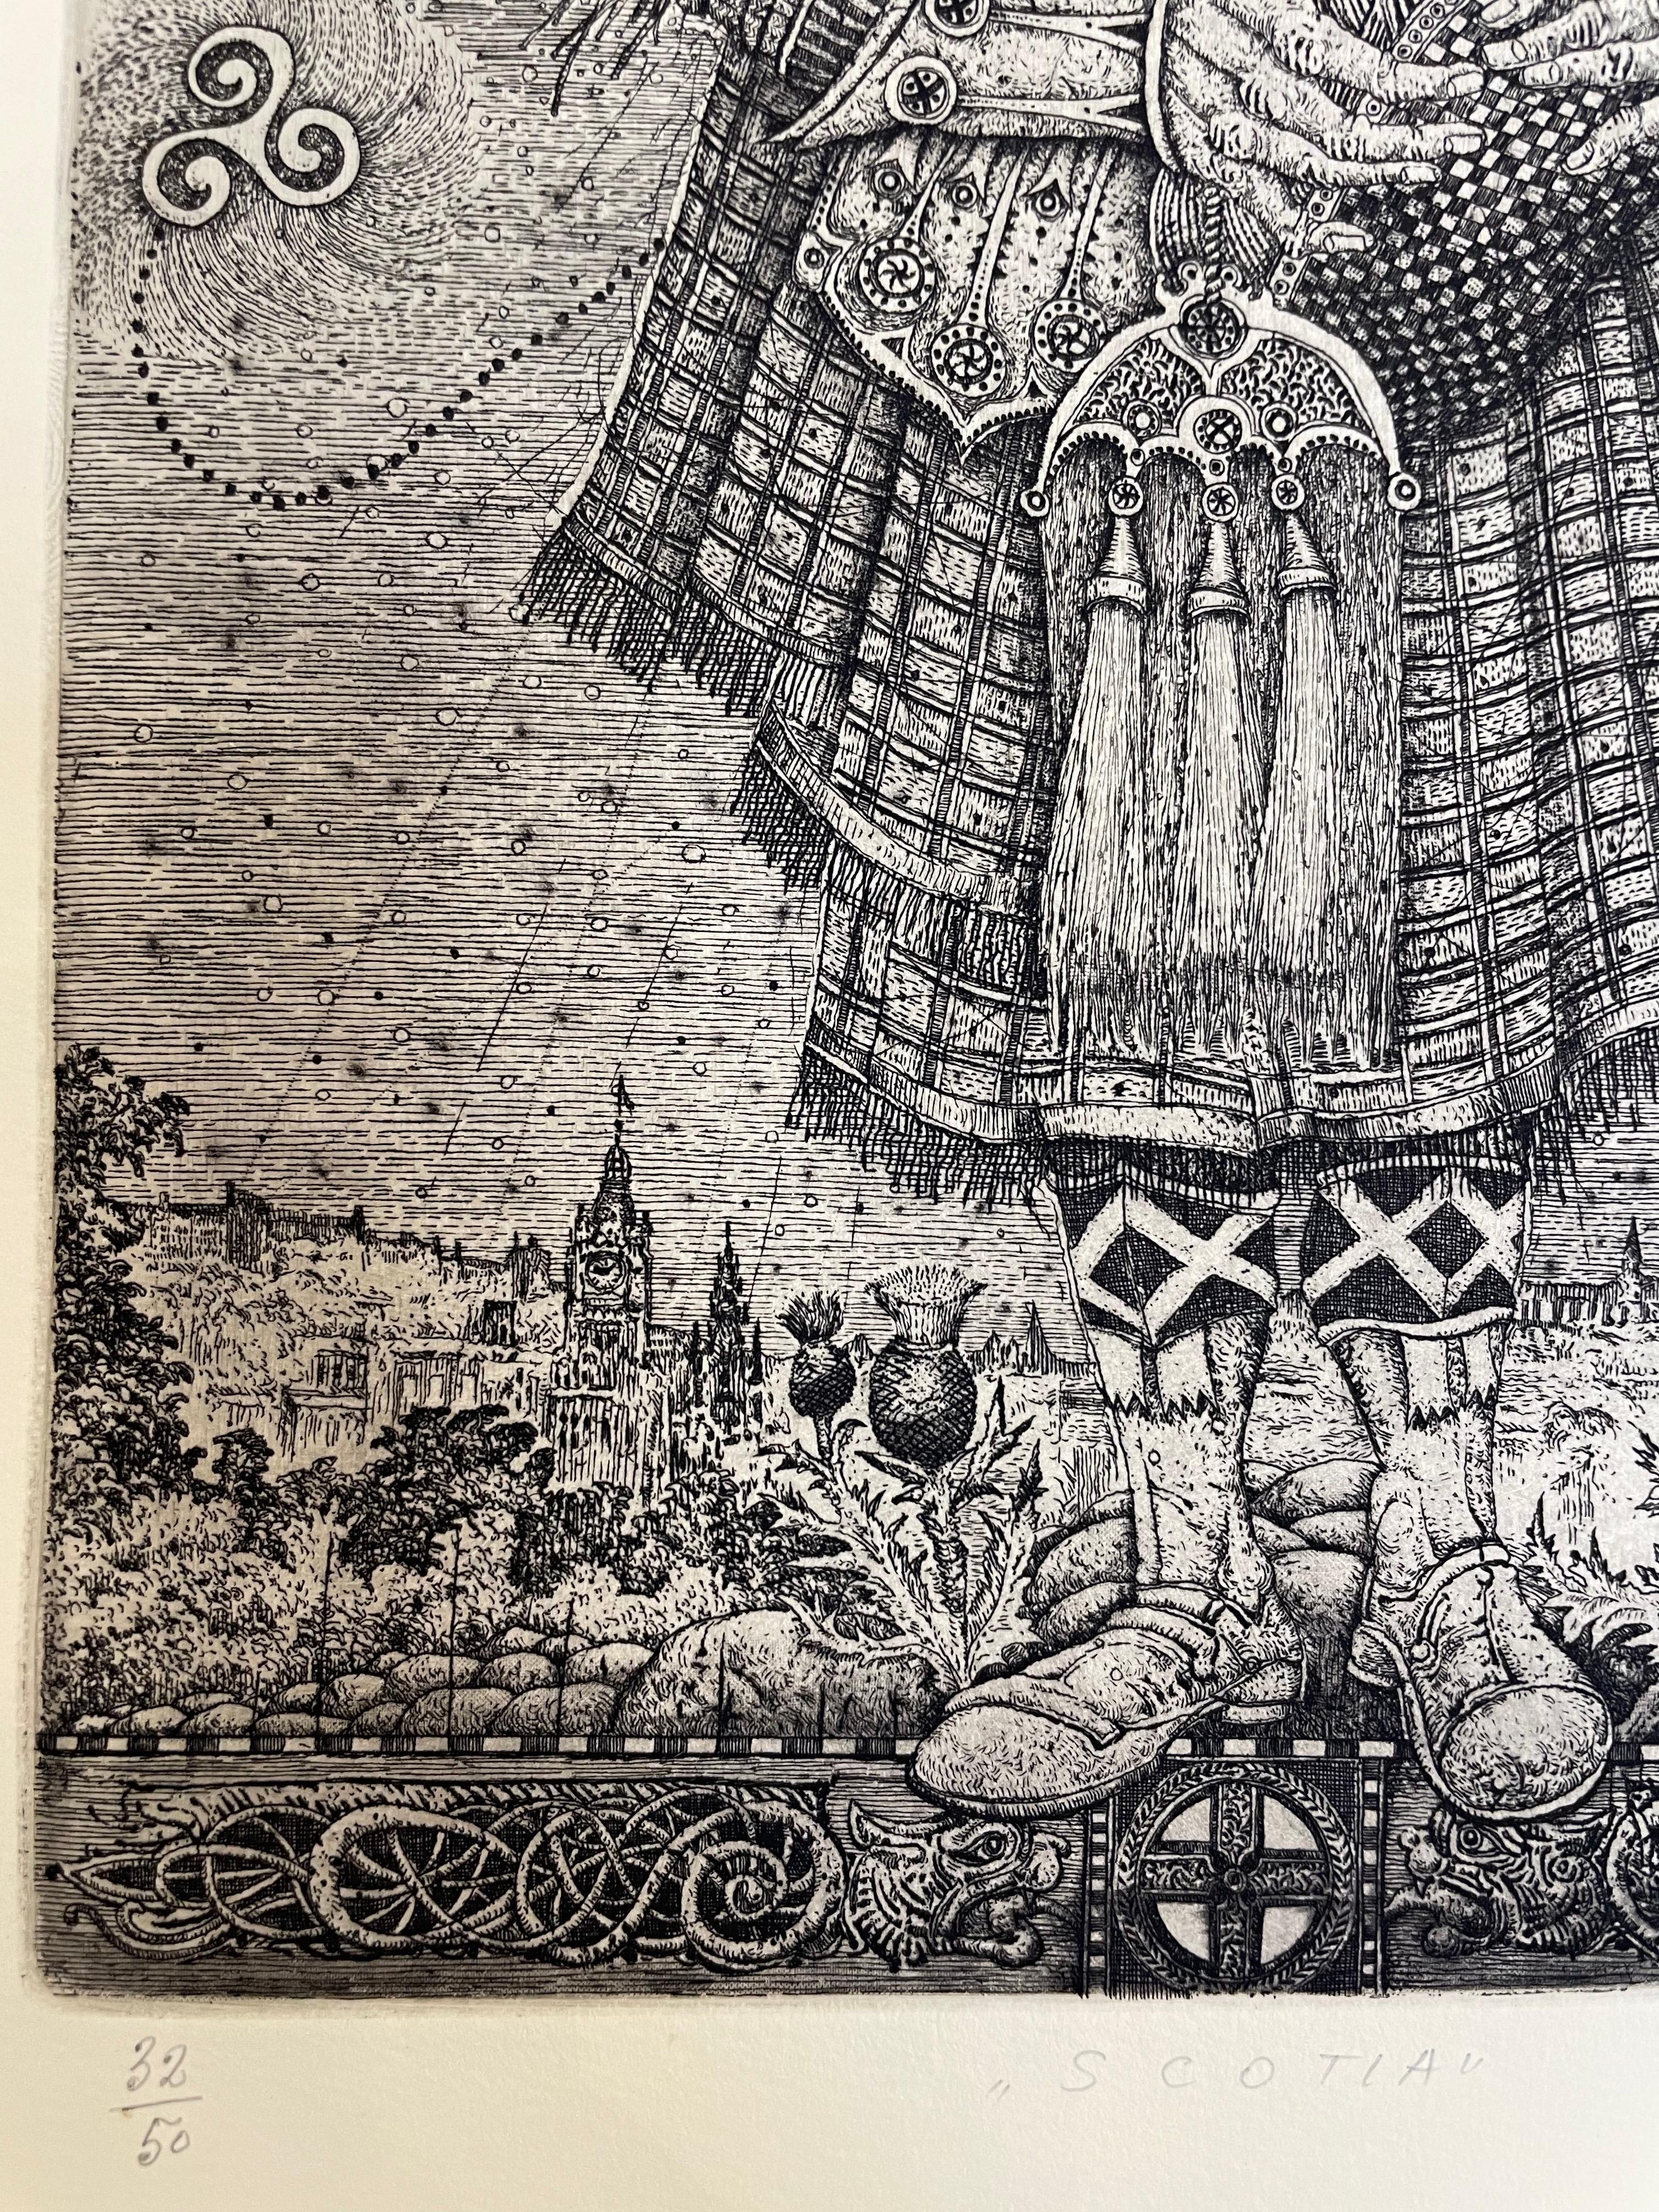 The etchings of Ukrainian print artist, Oleg Denisenko, delight the imagination with their fantastical themes and complex, intricate detail. The fineness of line and rich imagery reflect the very strong and active print tradition of Eastern Europe